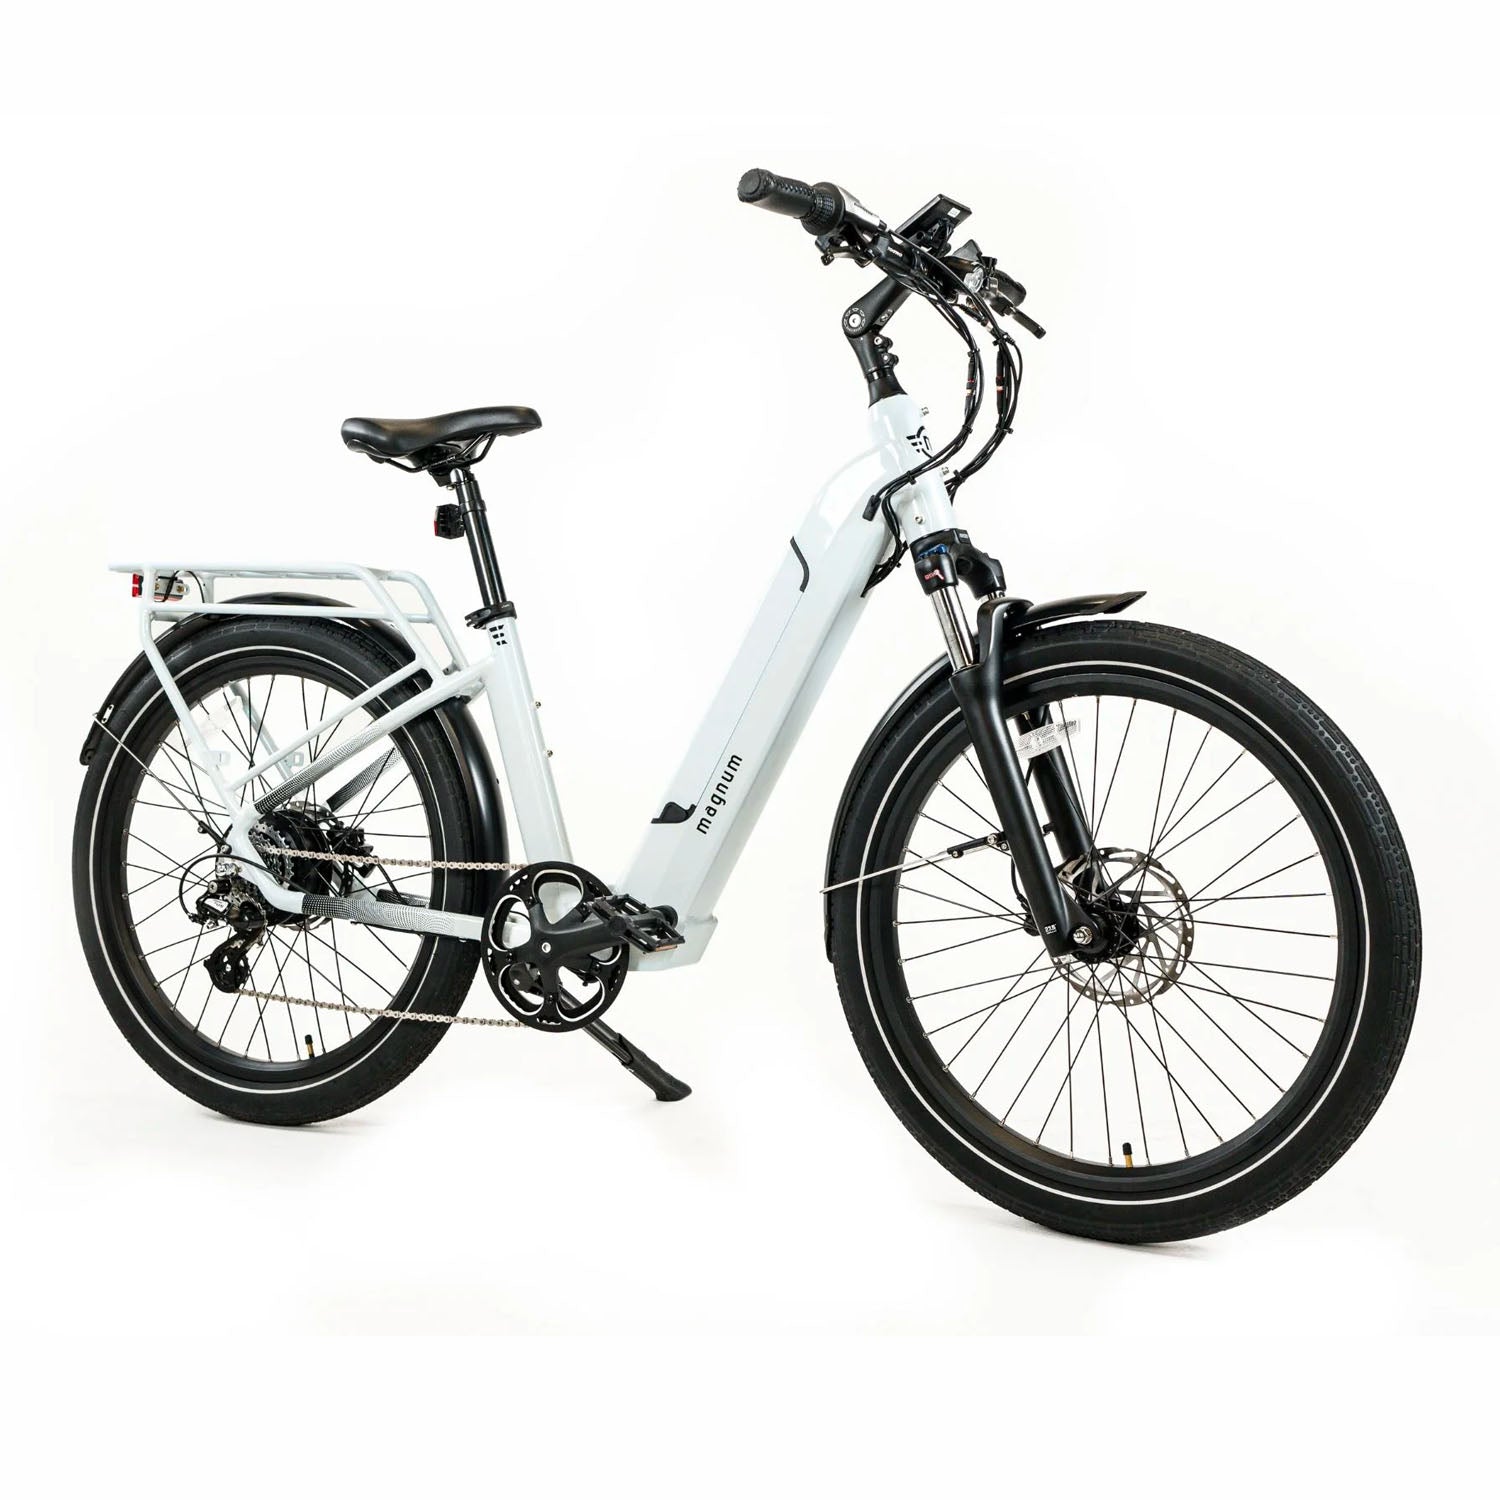 Magnum Cosmo 2 > 26 Tire > 500 48 V Motor 13AH > Low Step > Pearl, Bixby Bicycles, bixbybicycles.com